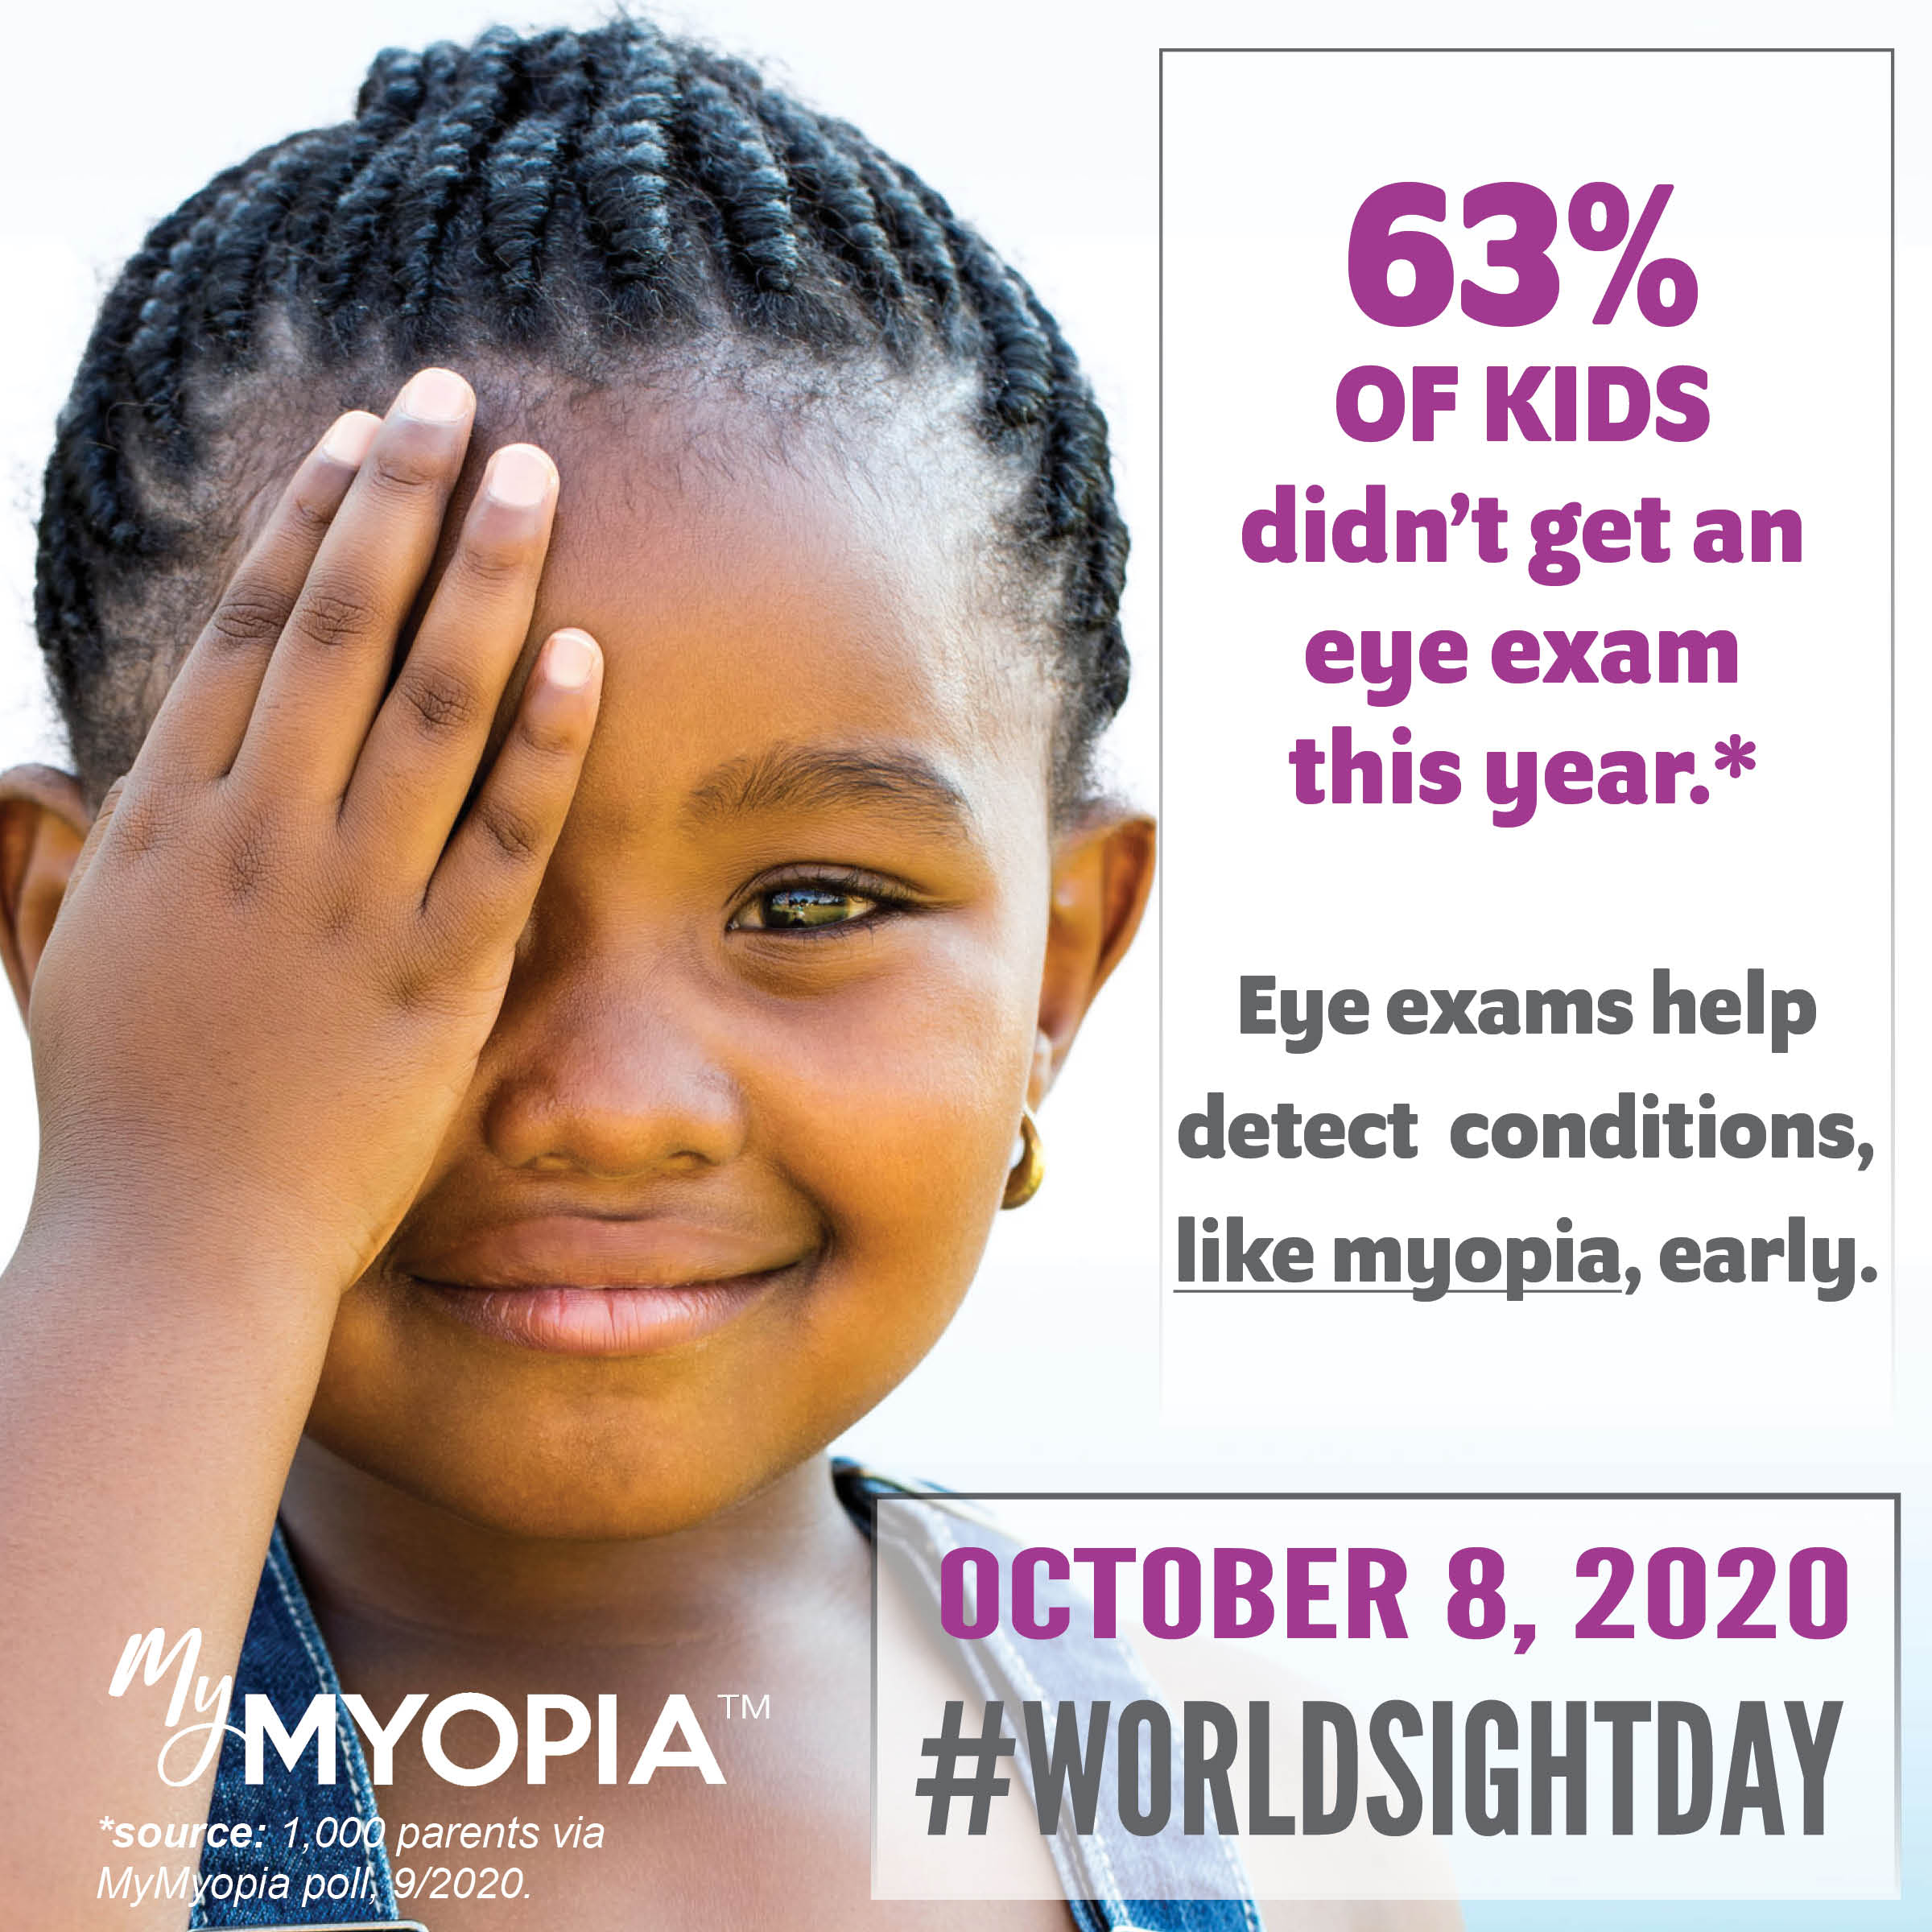 World Sight Day 2020 square_poll data and eye exam message 2